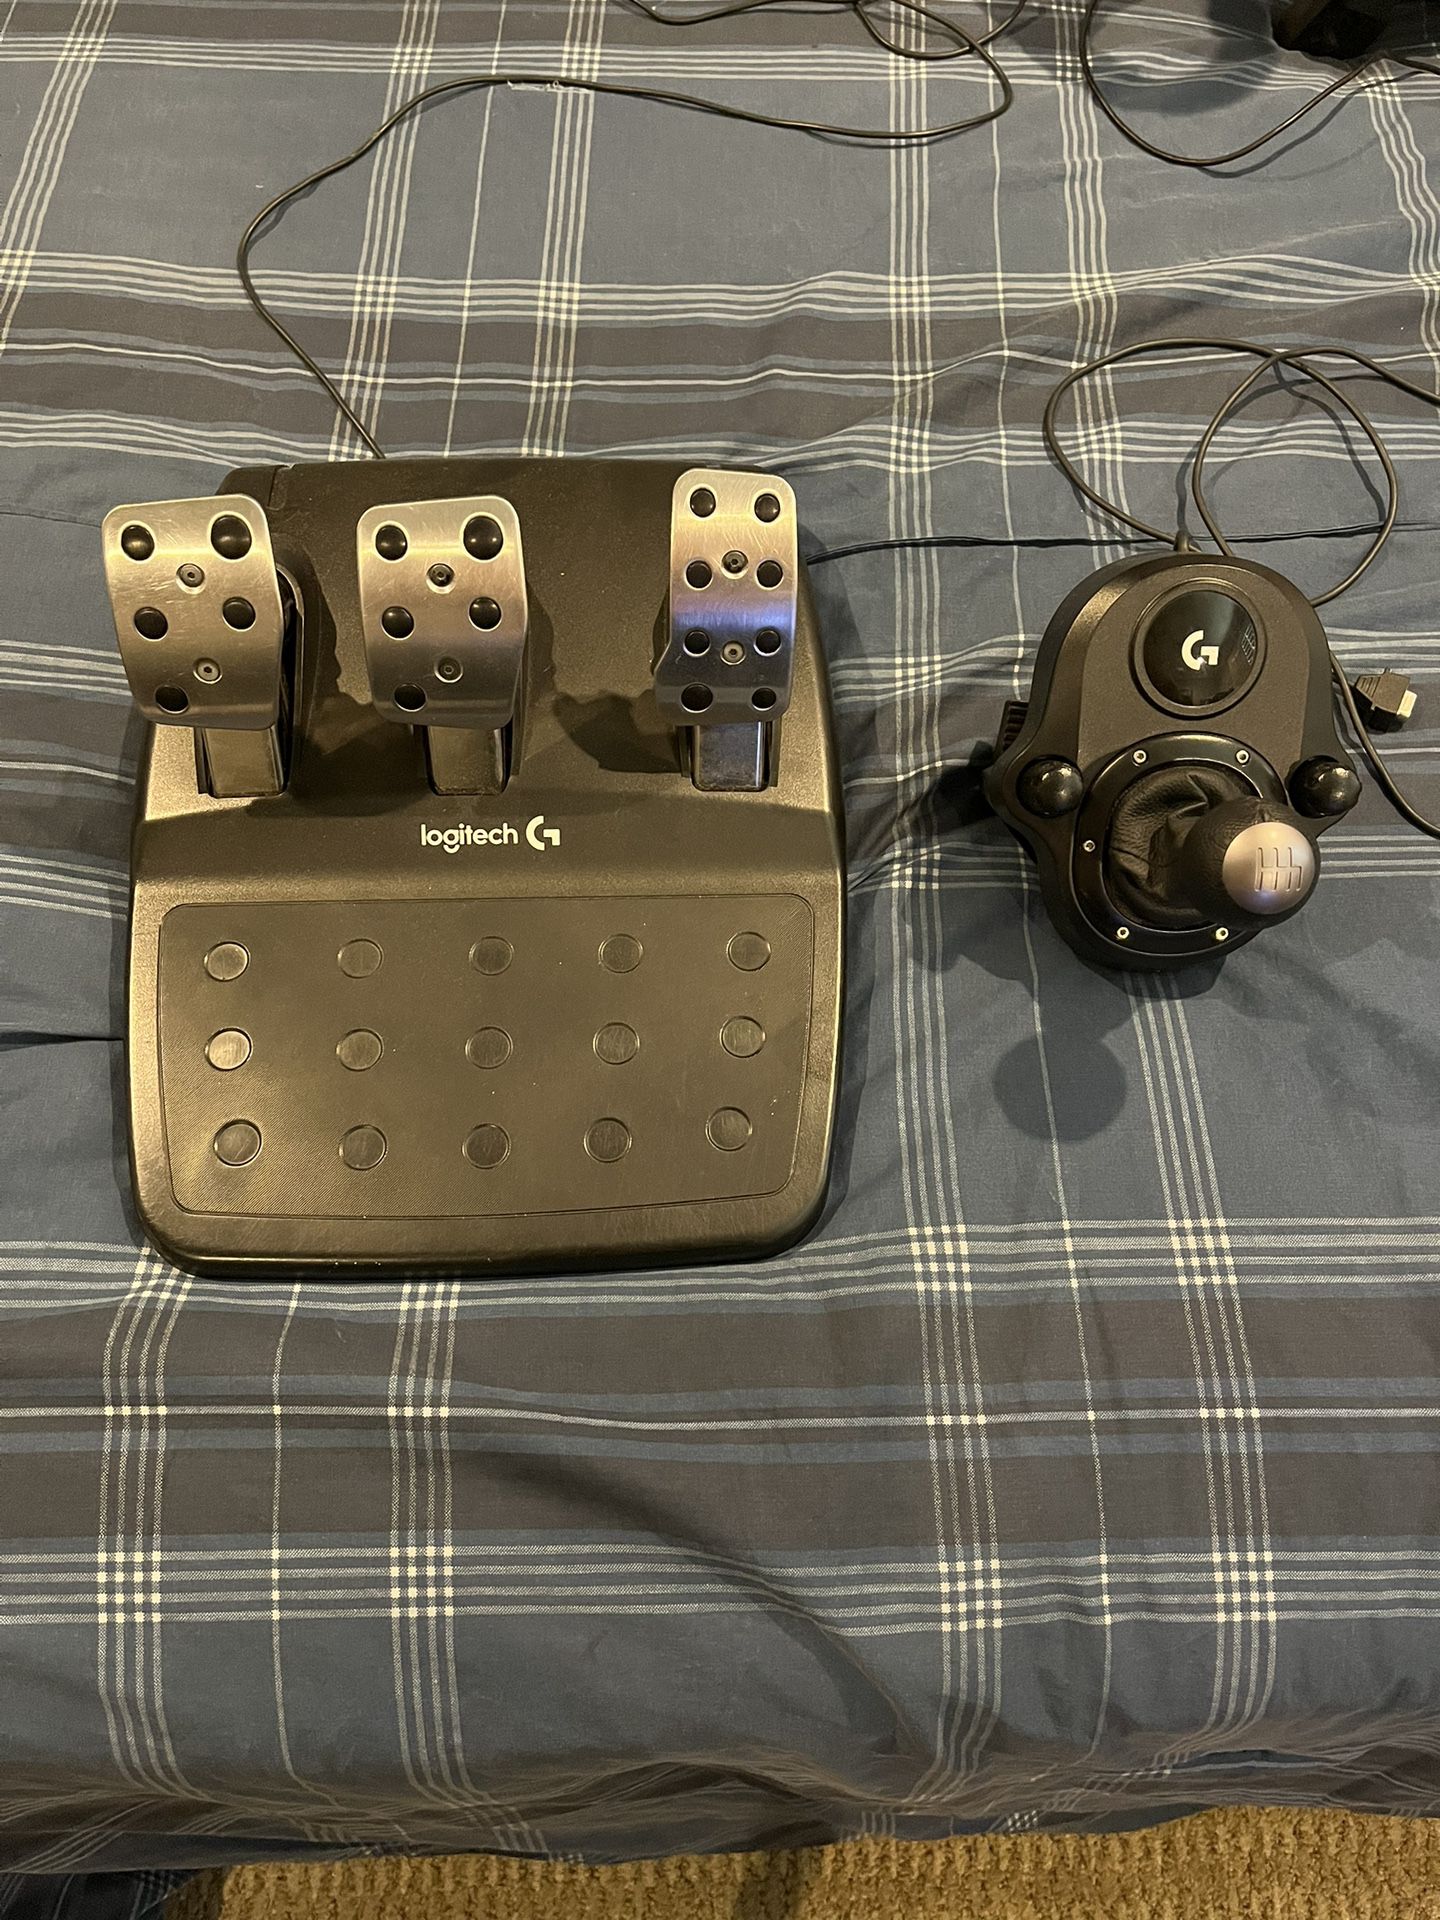 LOGITECH G27 GREAT CONDITION WITH SHIFTER for Sale in Ontario, CA - OfferUp